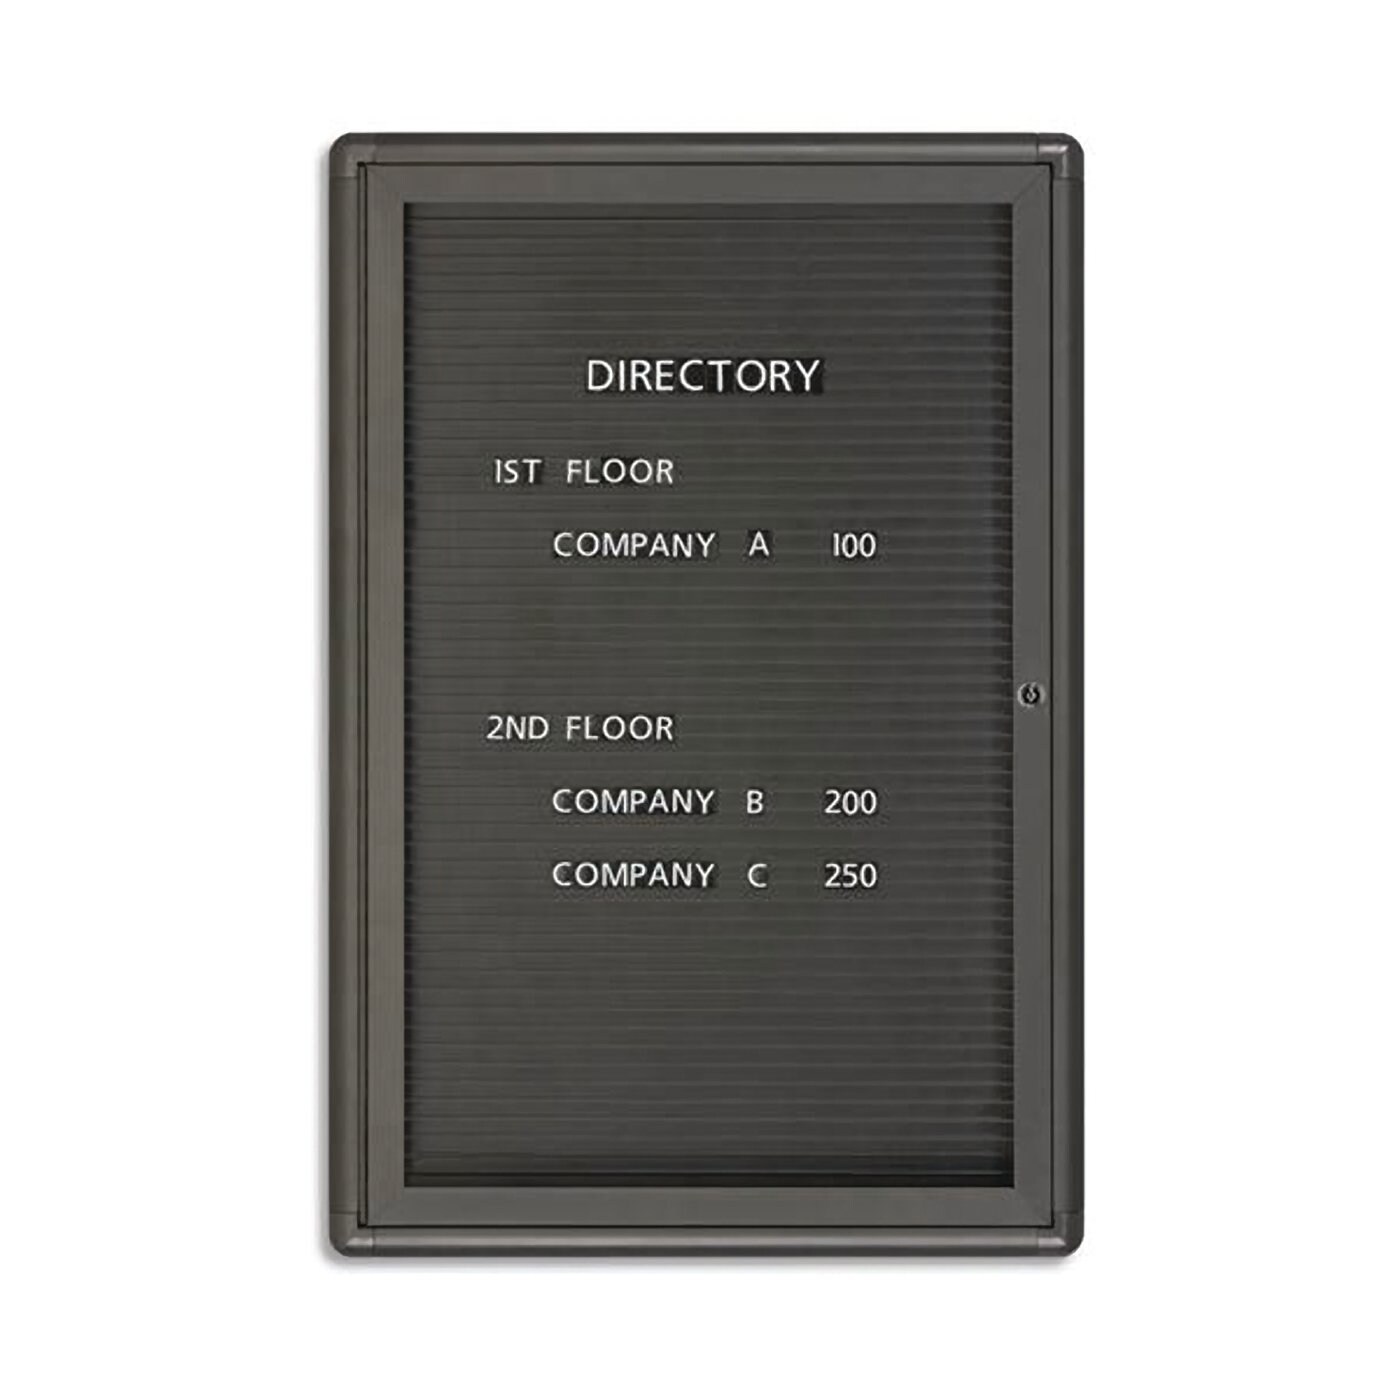 Acco Board Changeable Letter Magnet 24x36" Graphite Frame